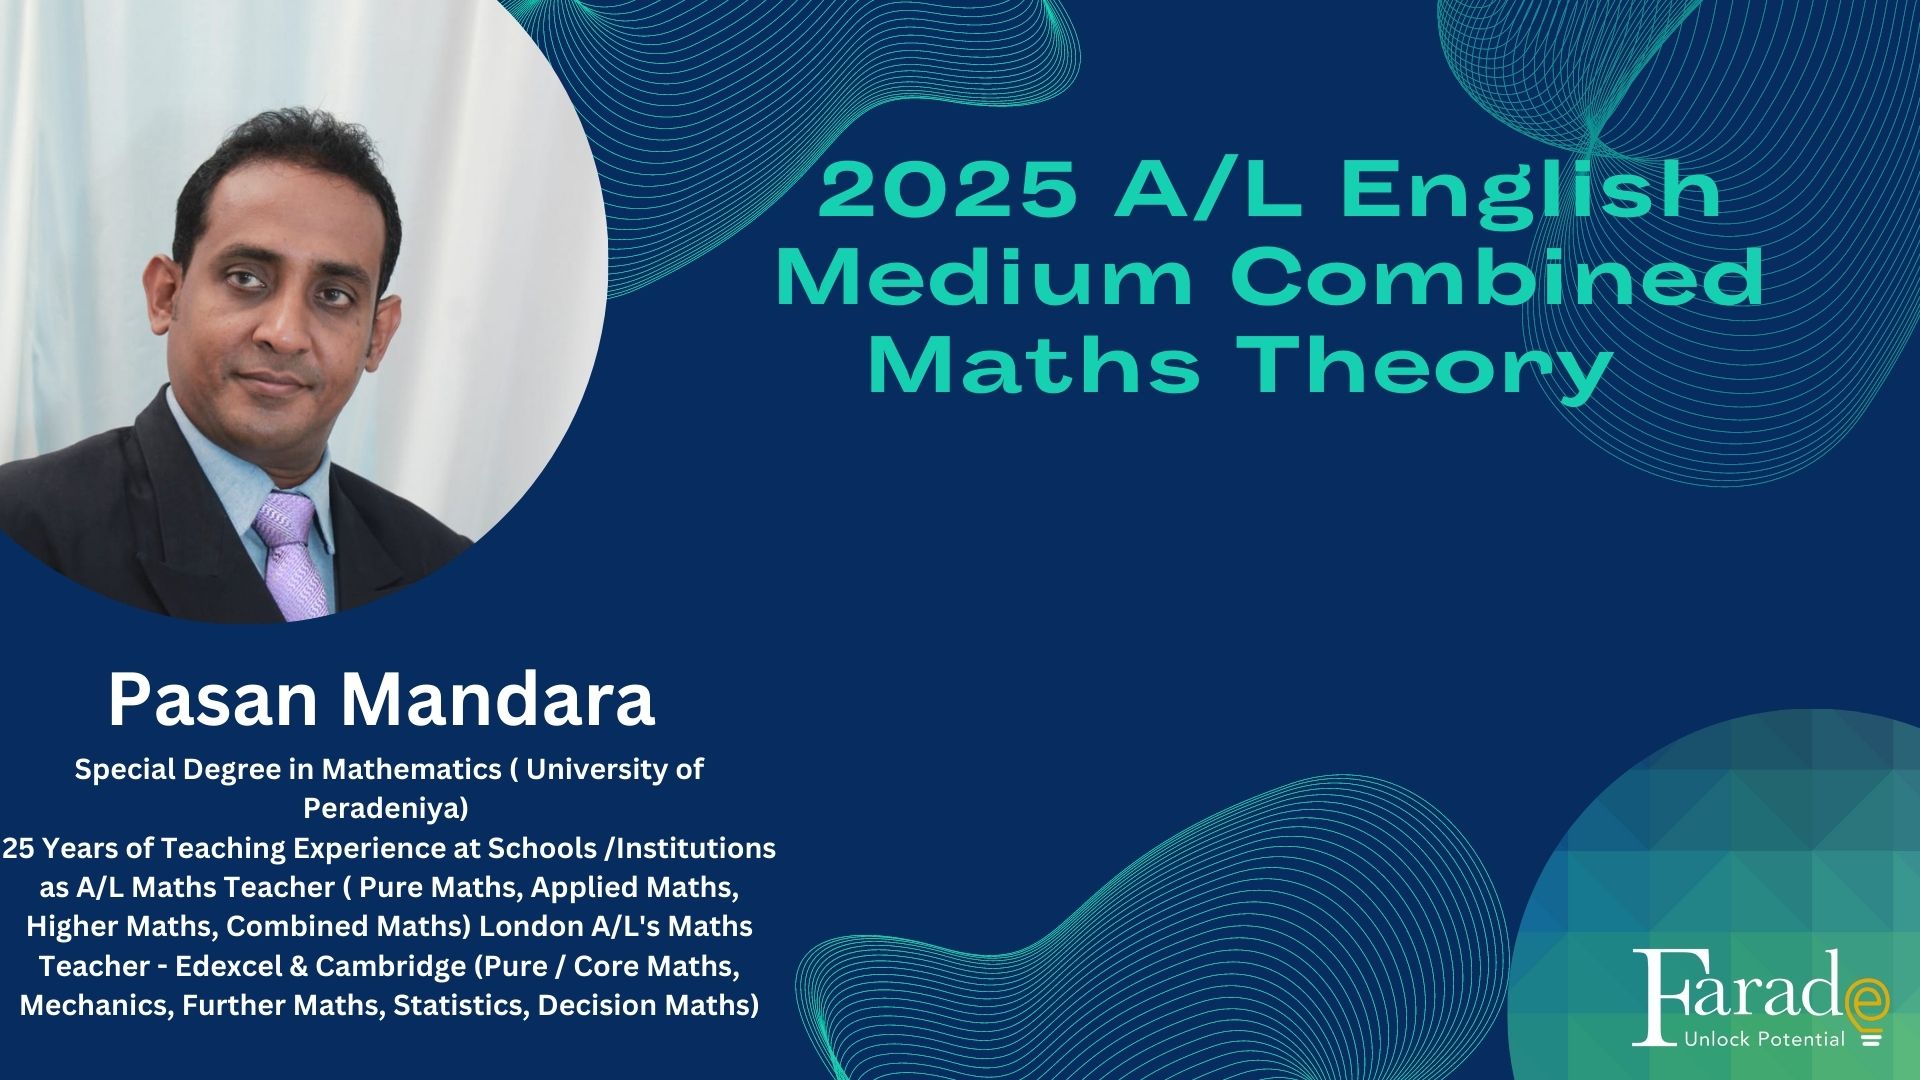 2025 A/L Combined Maths Theory Course August 23 – Pasan Mandara